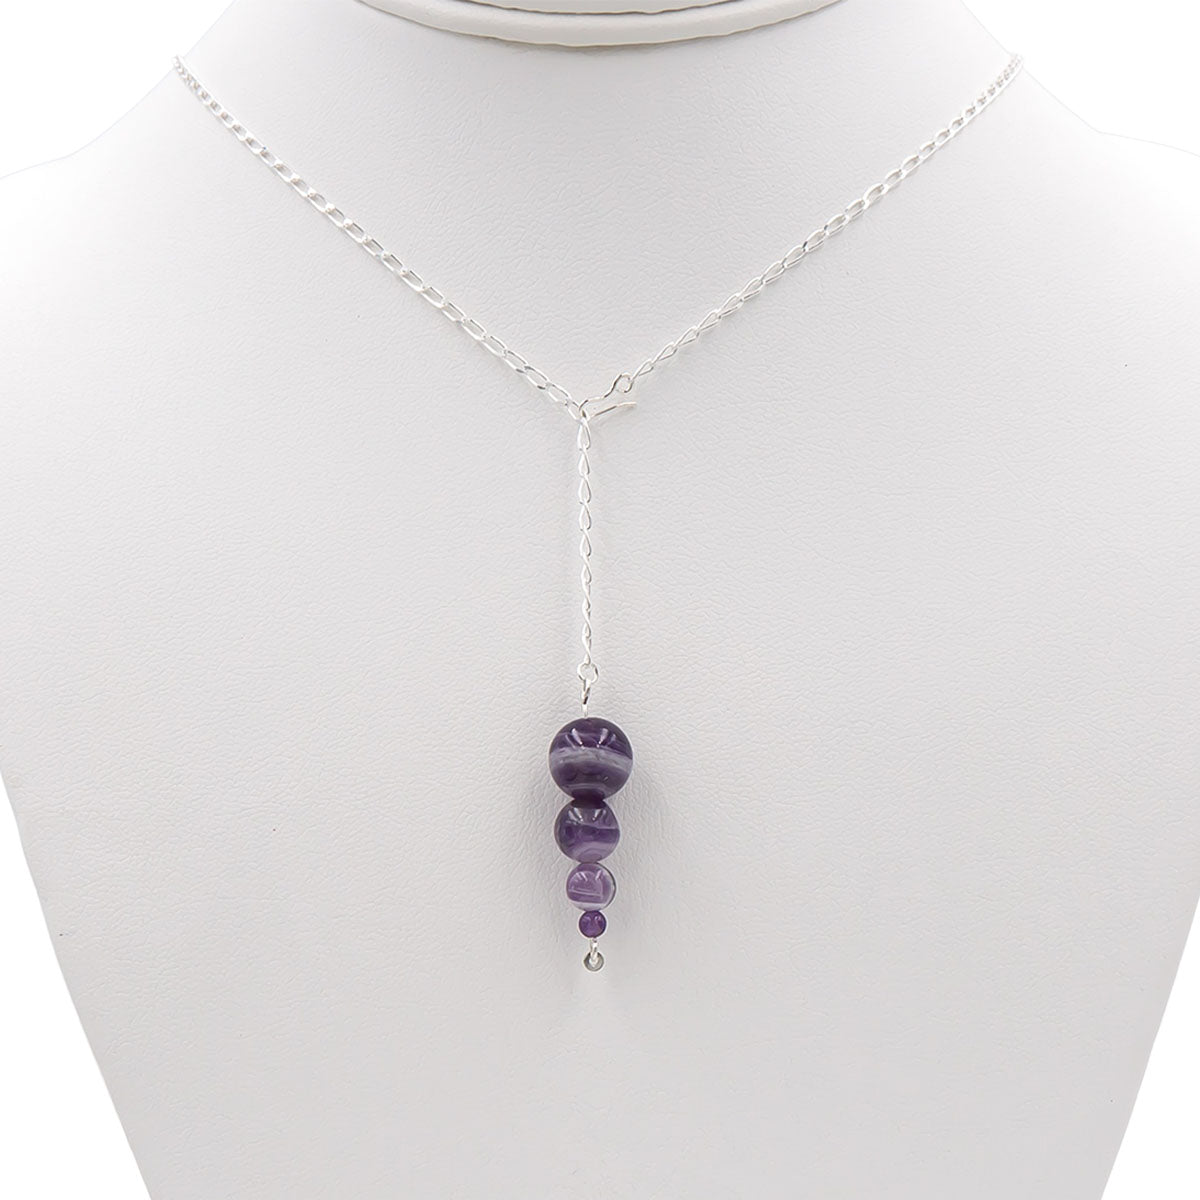 Earth Song Jewelry Handmade Amethyst Pendant Sterling Silver Lariat Necklace - Eco-Friendly Jewelry handmade in Colorado, USA